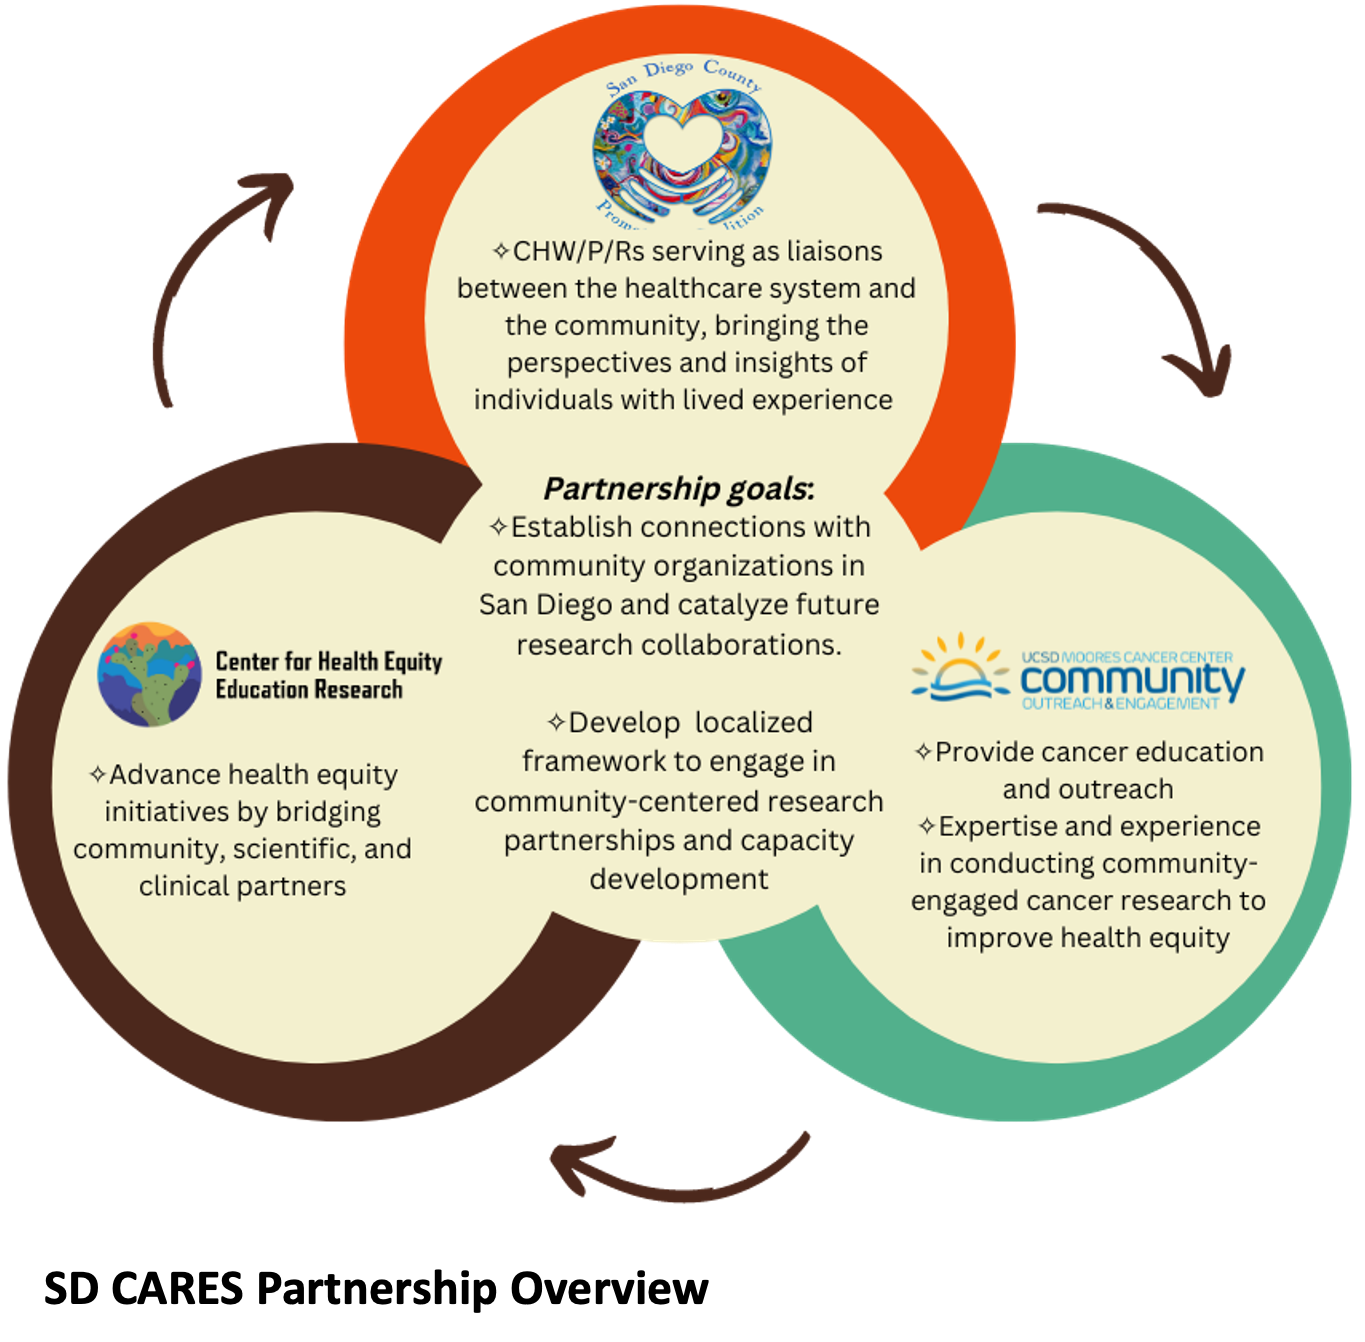 SD Cares Partnership Overview